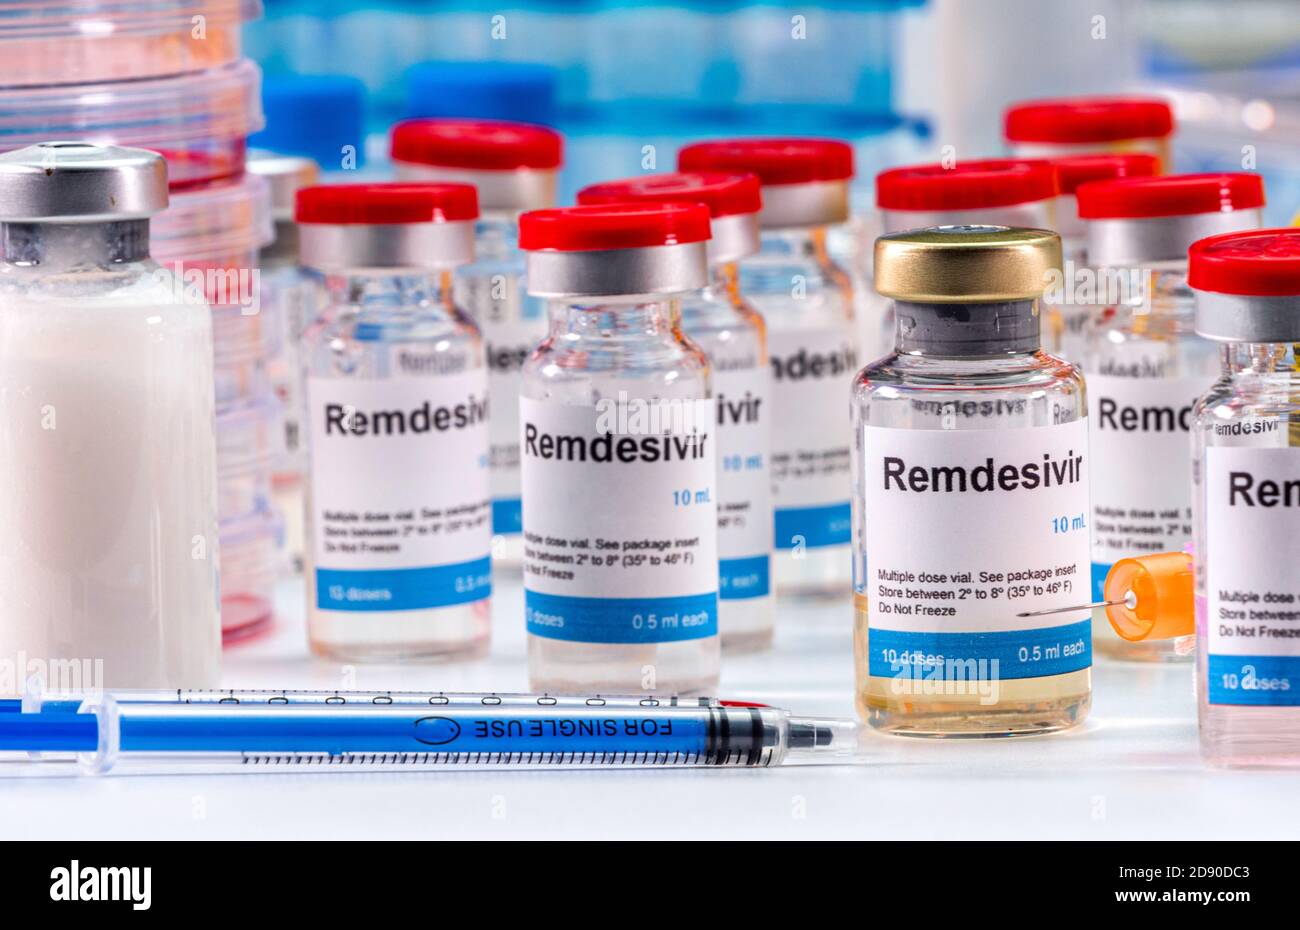 Medication prepared for people affected by Covid-19, Remdesivir is a selective antiviral prophylactic against virus that is already in experimental us Stock Photo